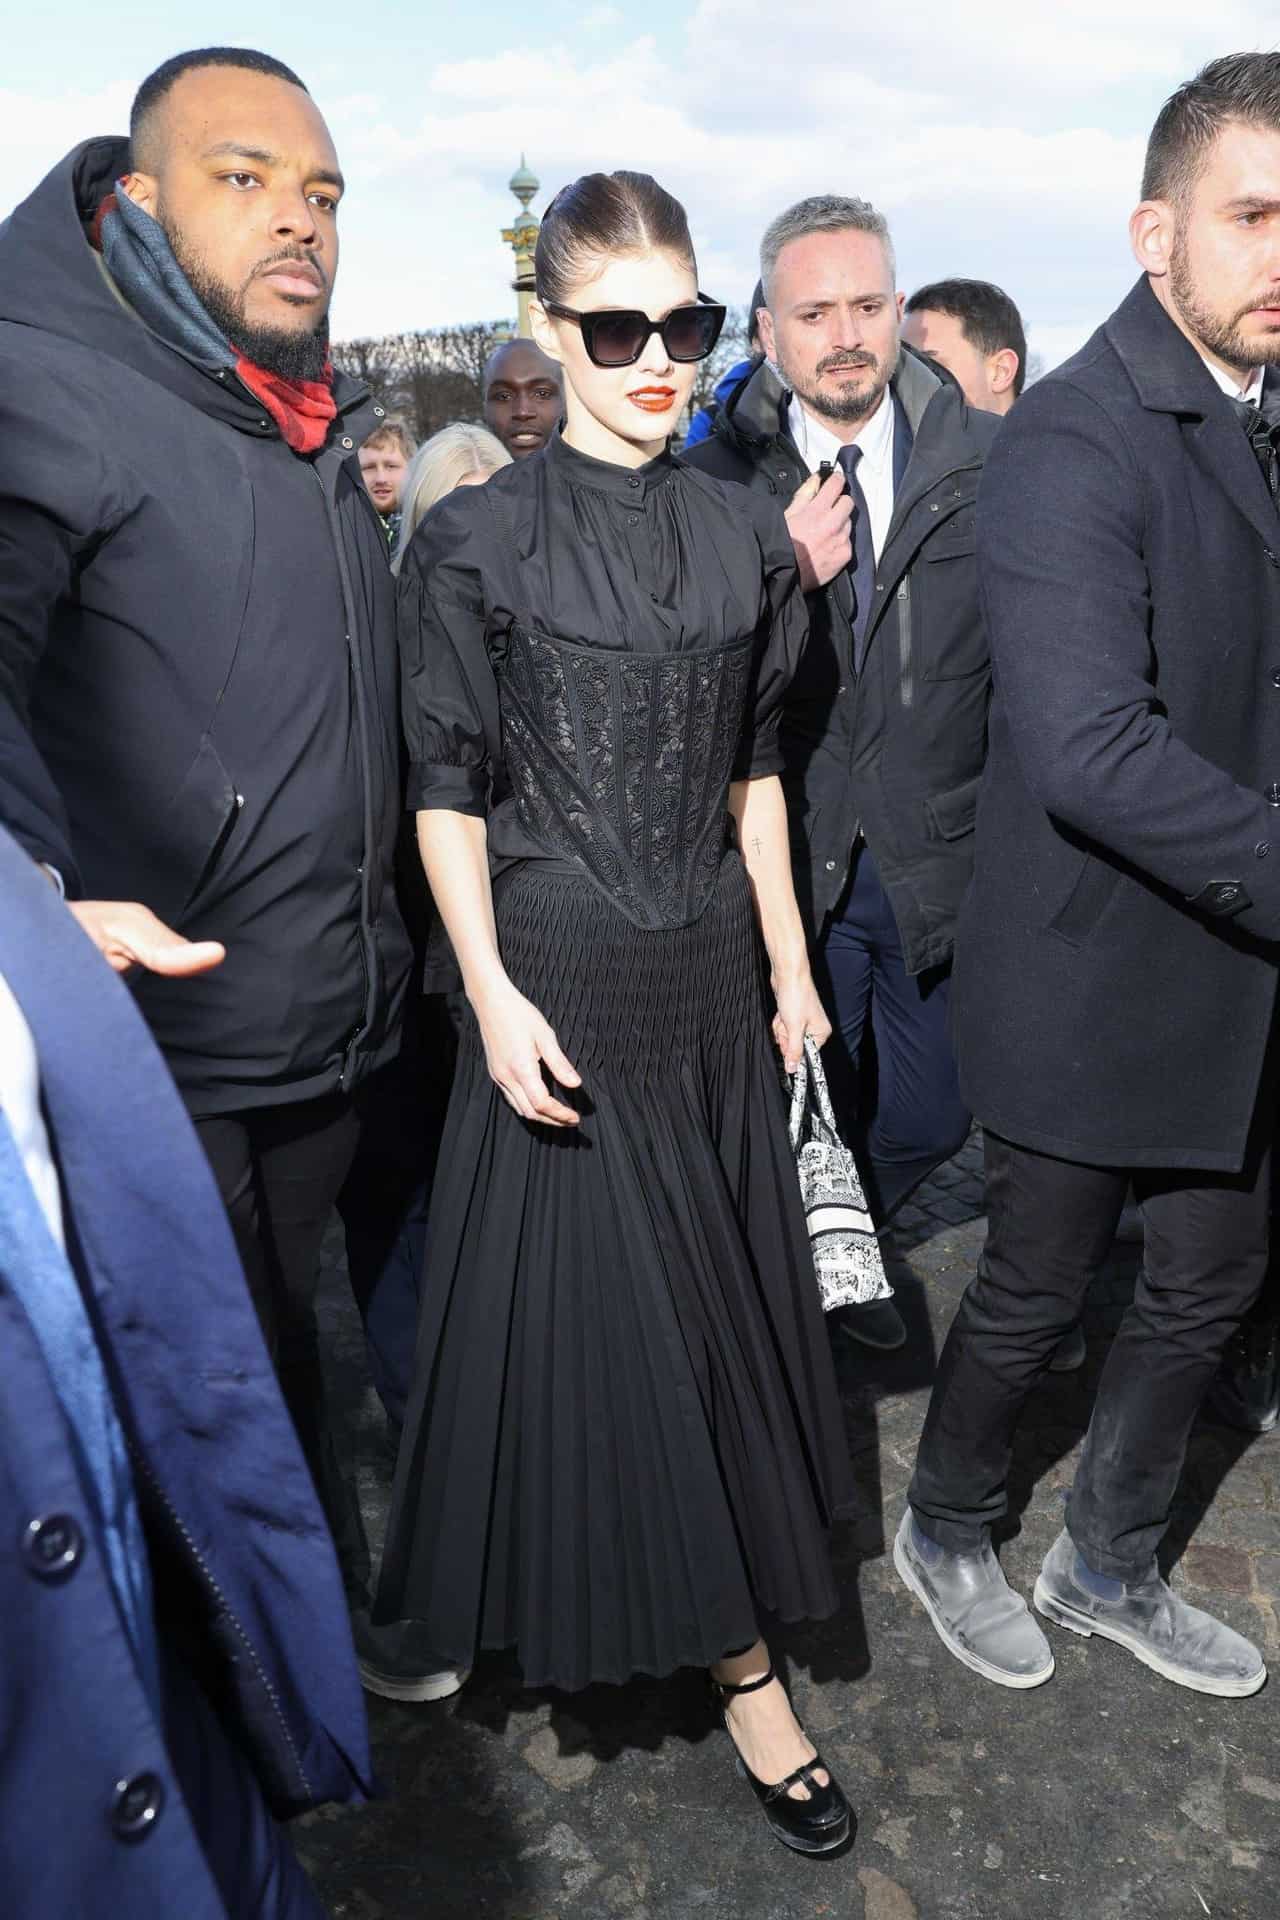 Alexandra Daddario in Gothic Dress Attends Dior's Fall 2023 Show at PFW